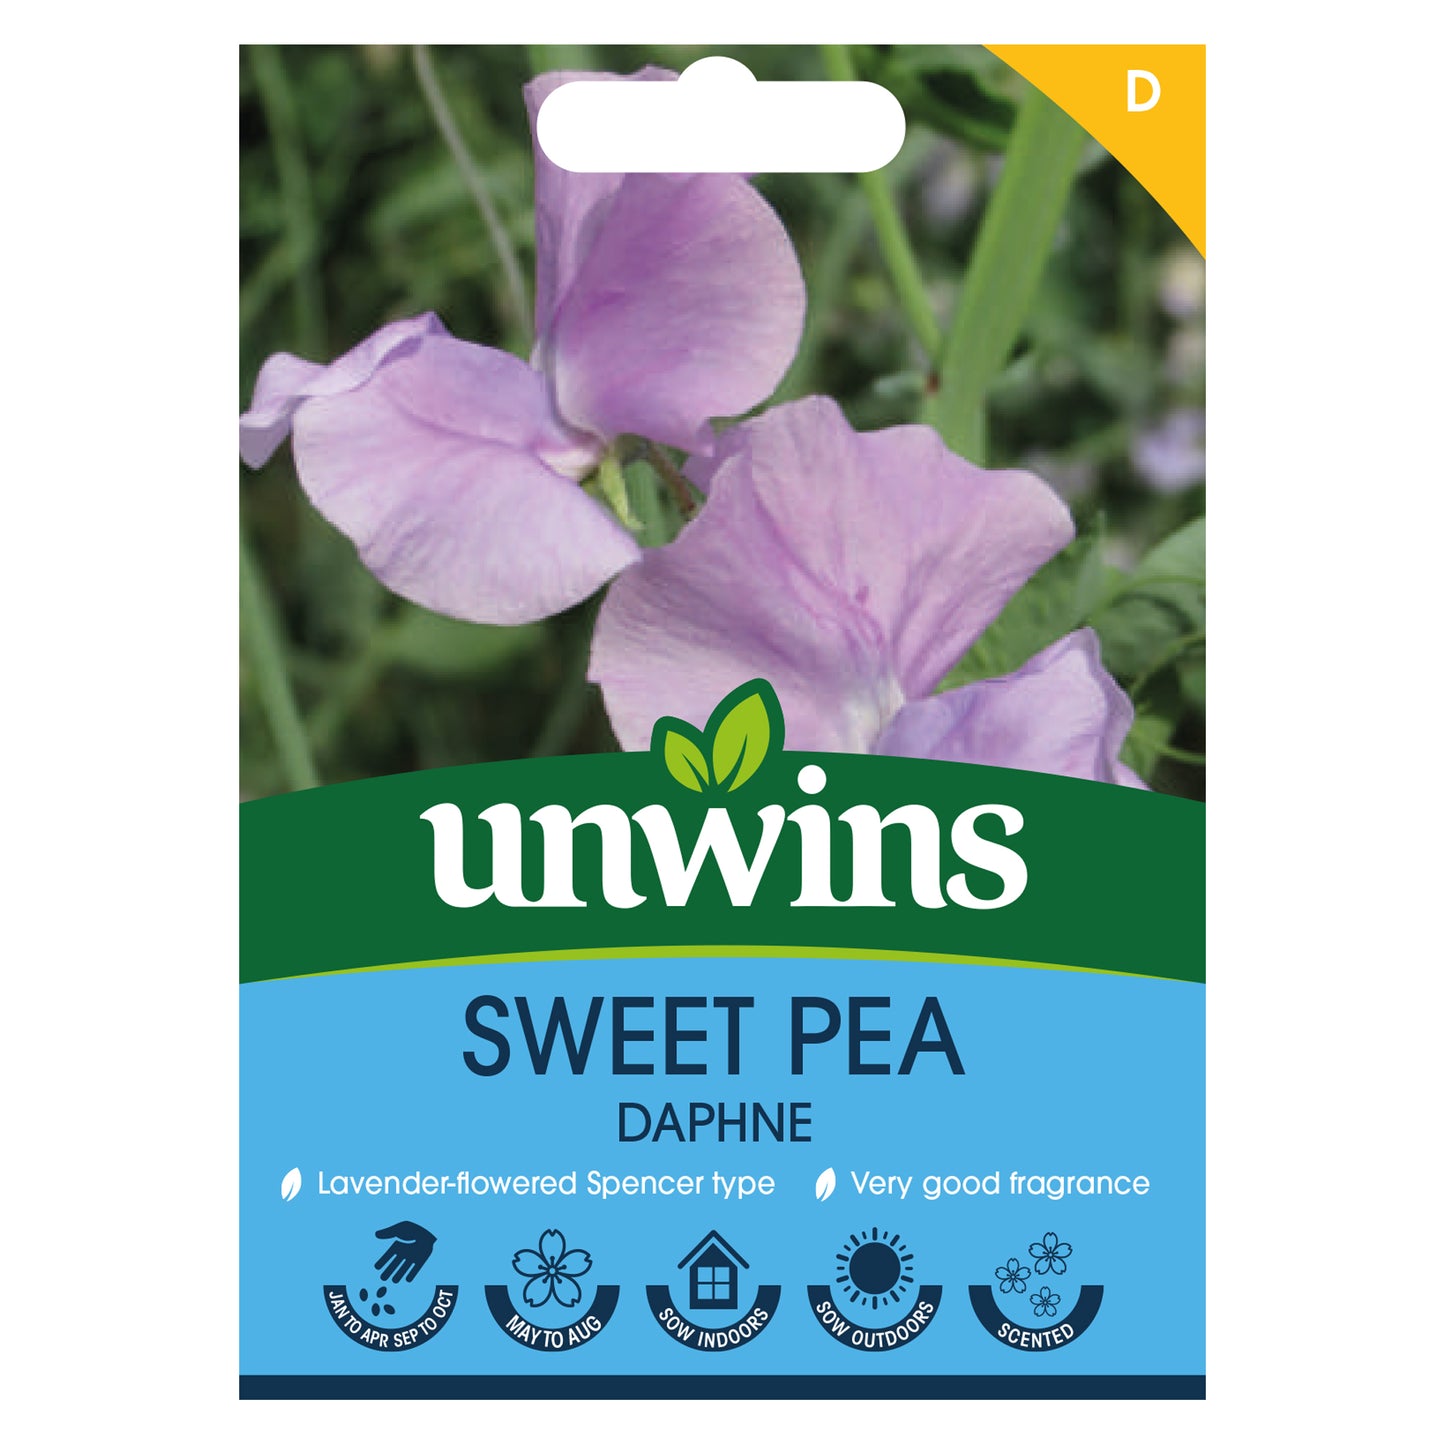 Unwins Sweet Pea Daphne Seeds front of pack